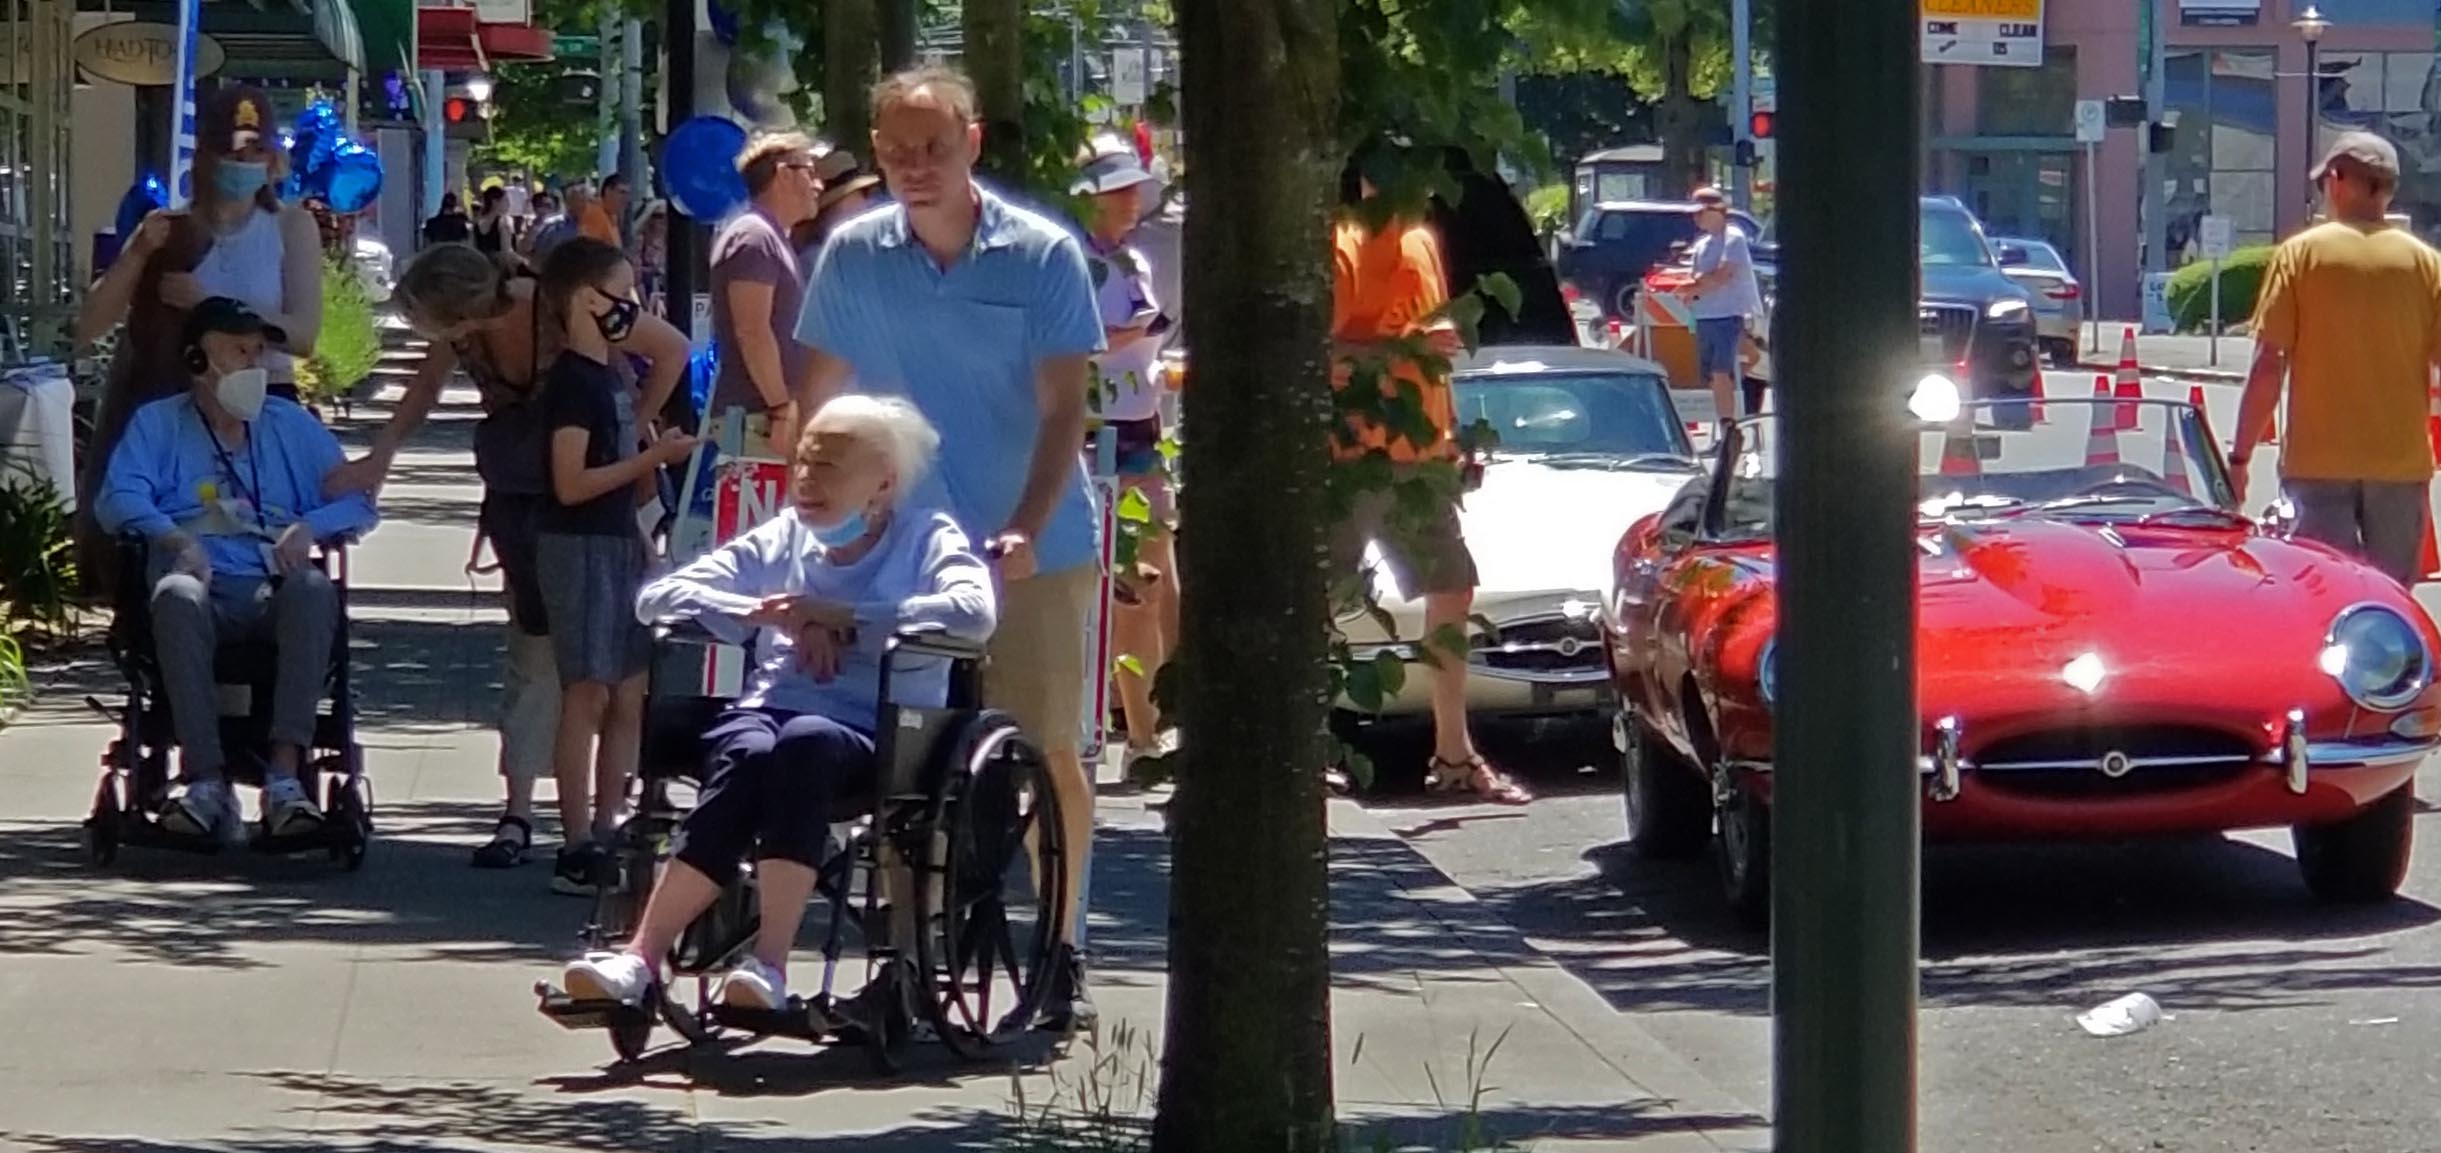 Festival atmosphere for the seniors and West Seattle residents